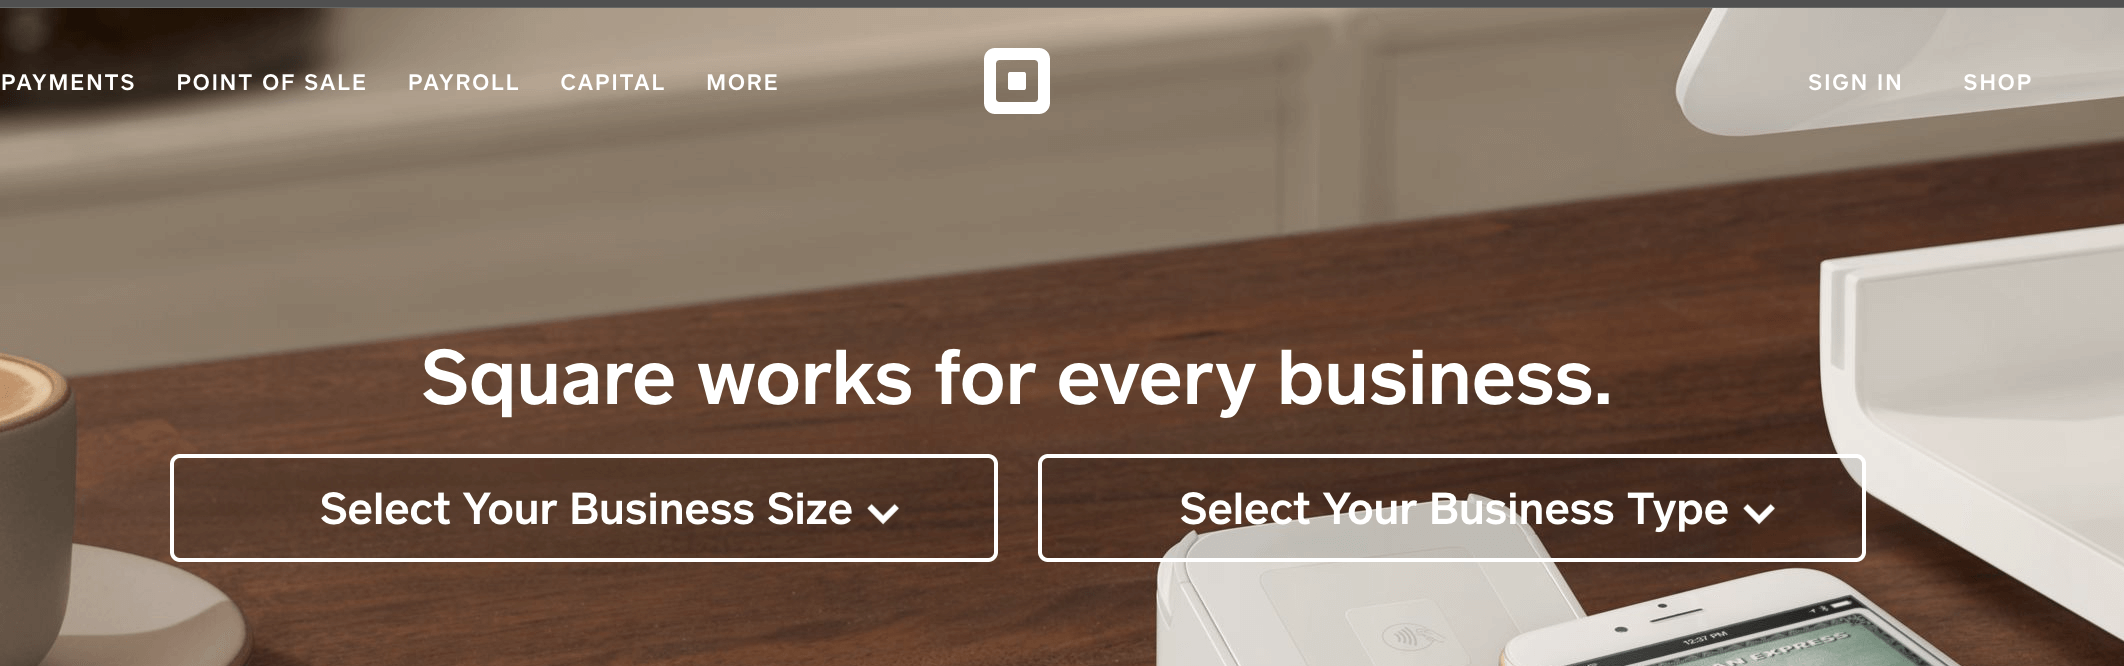 Square's landing page